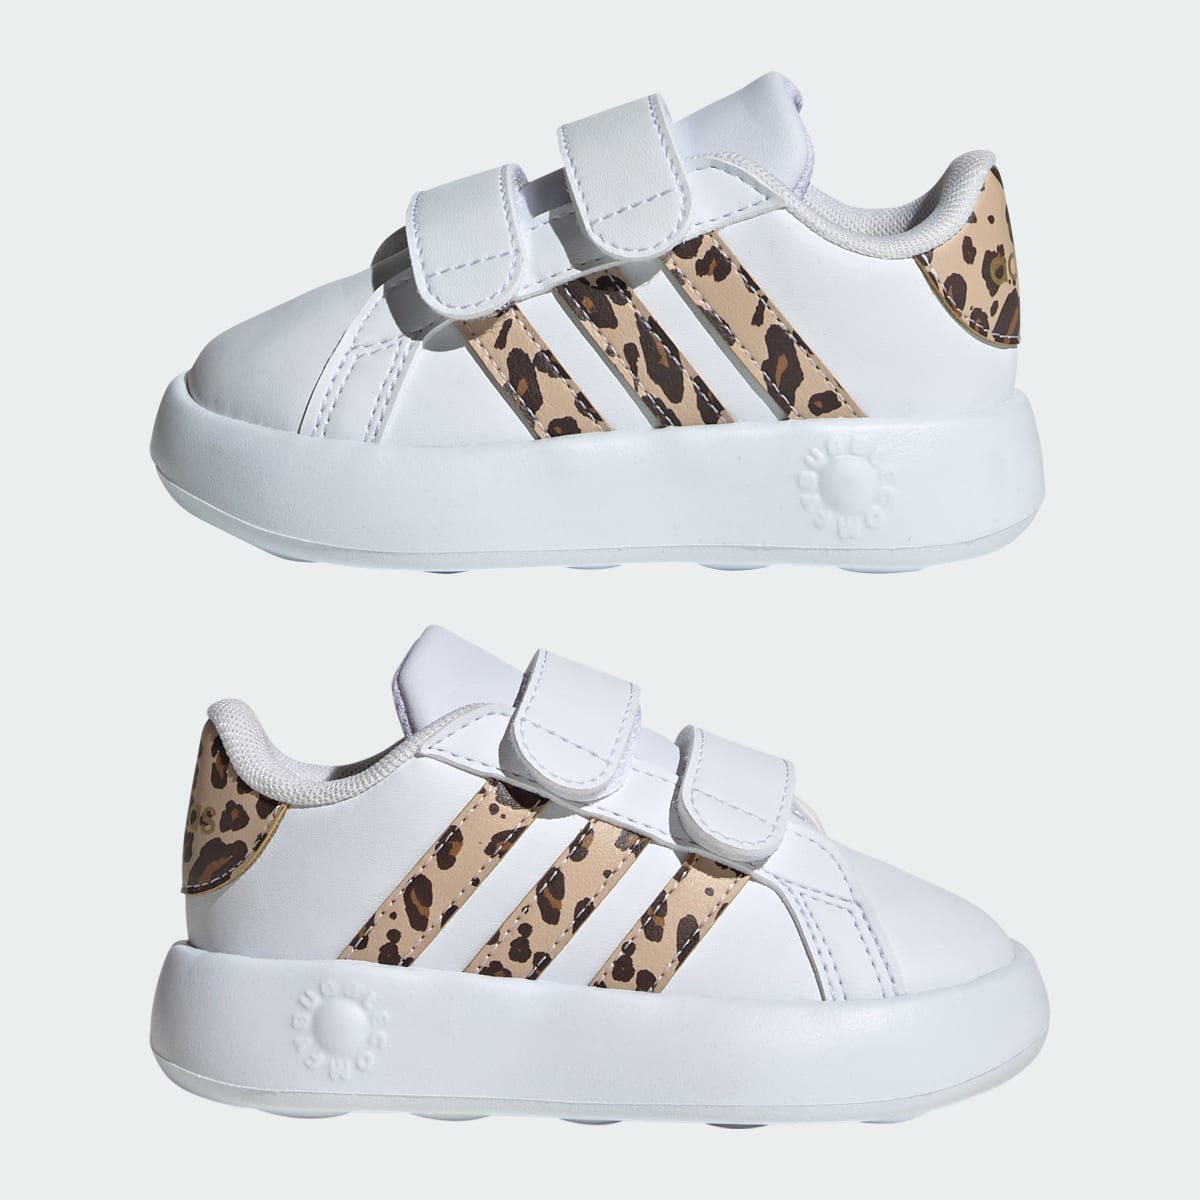 Adidas Grand Court 2.0 Shoes Kids. 8